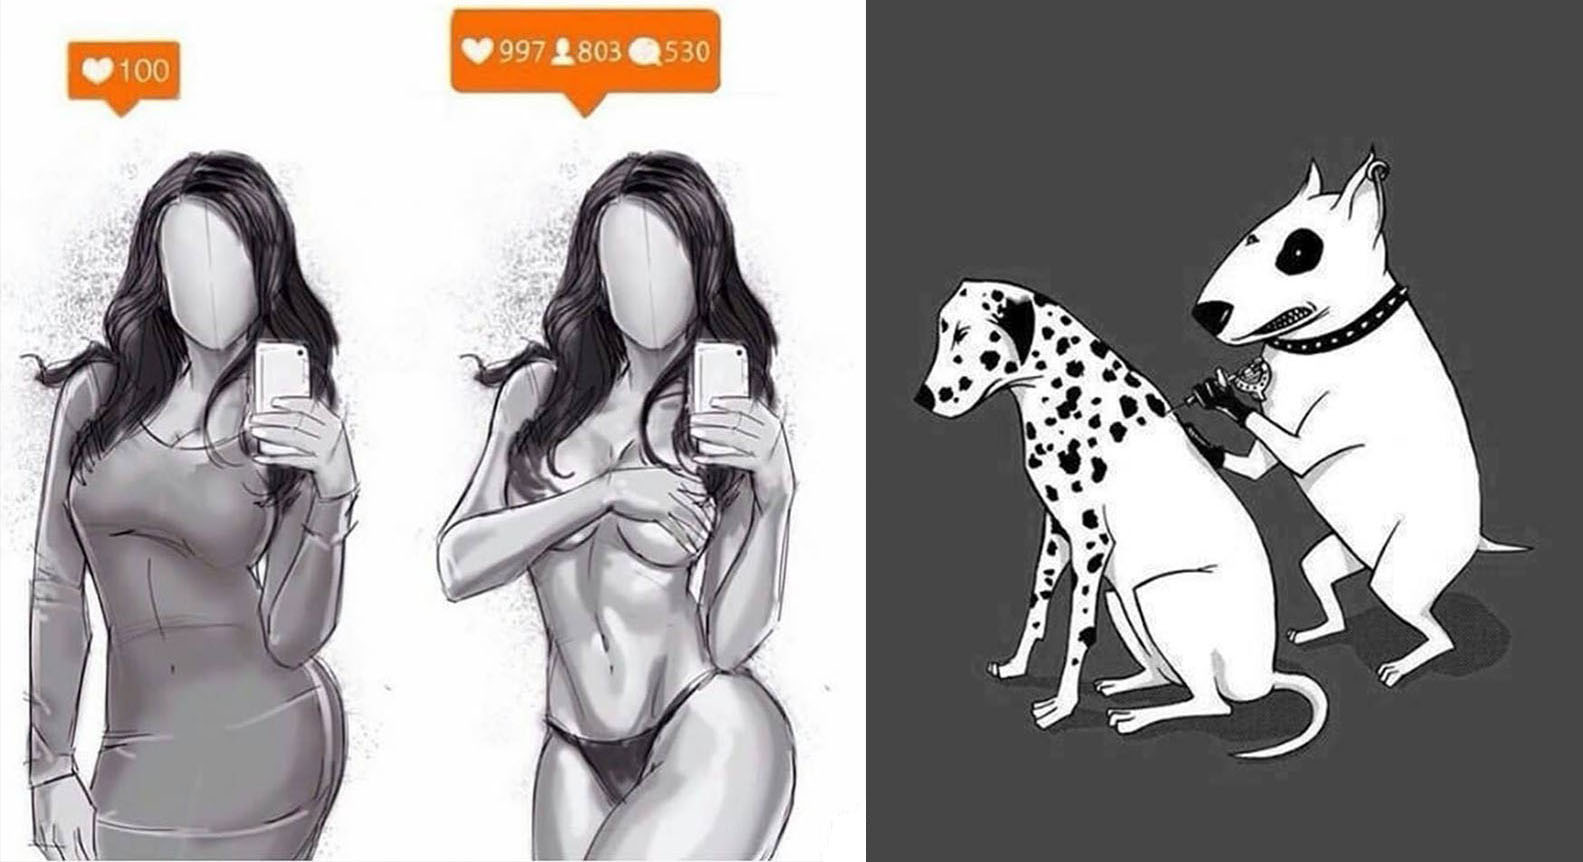 30+ Candid Illustrations With Deeper Meanings Show The Irony Of Today's World